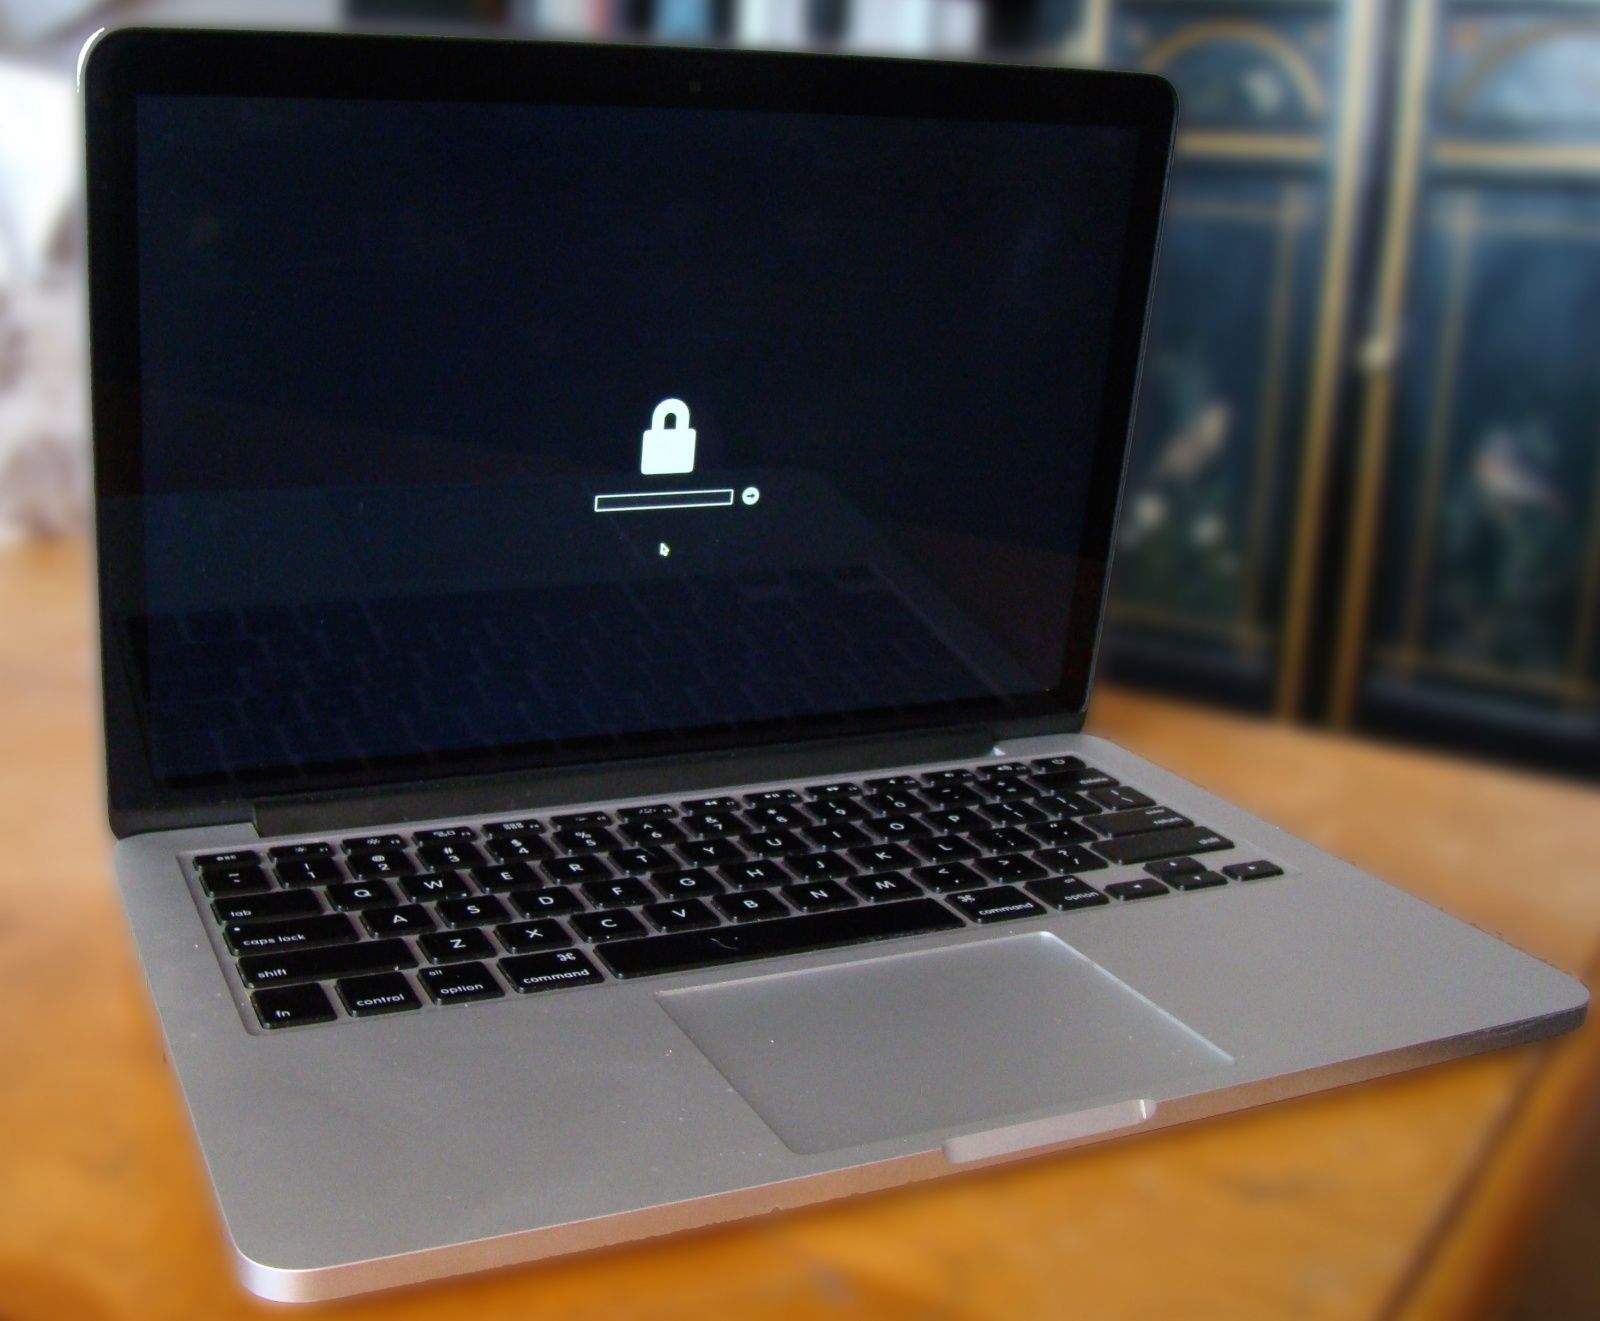 Passwords can lock you out, too. Photo: Rob LeFebvre/Cult of Mac